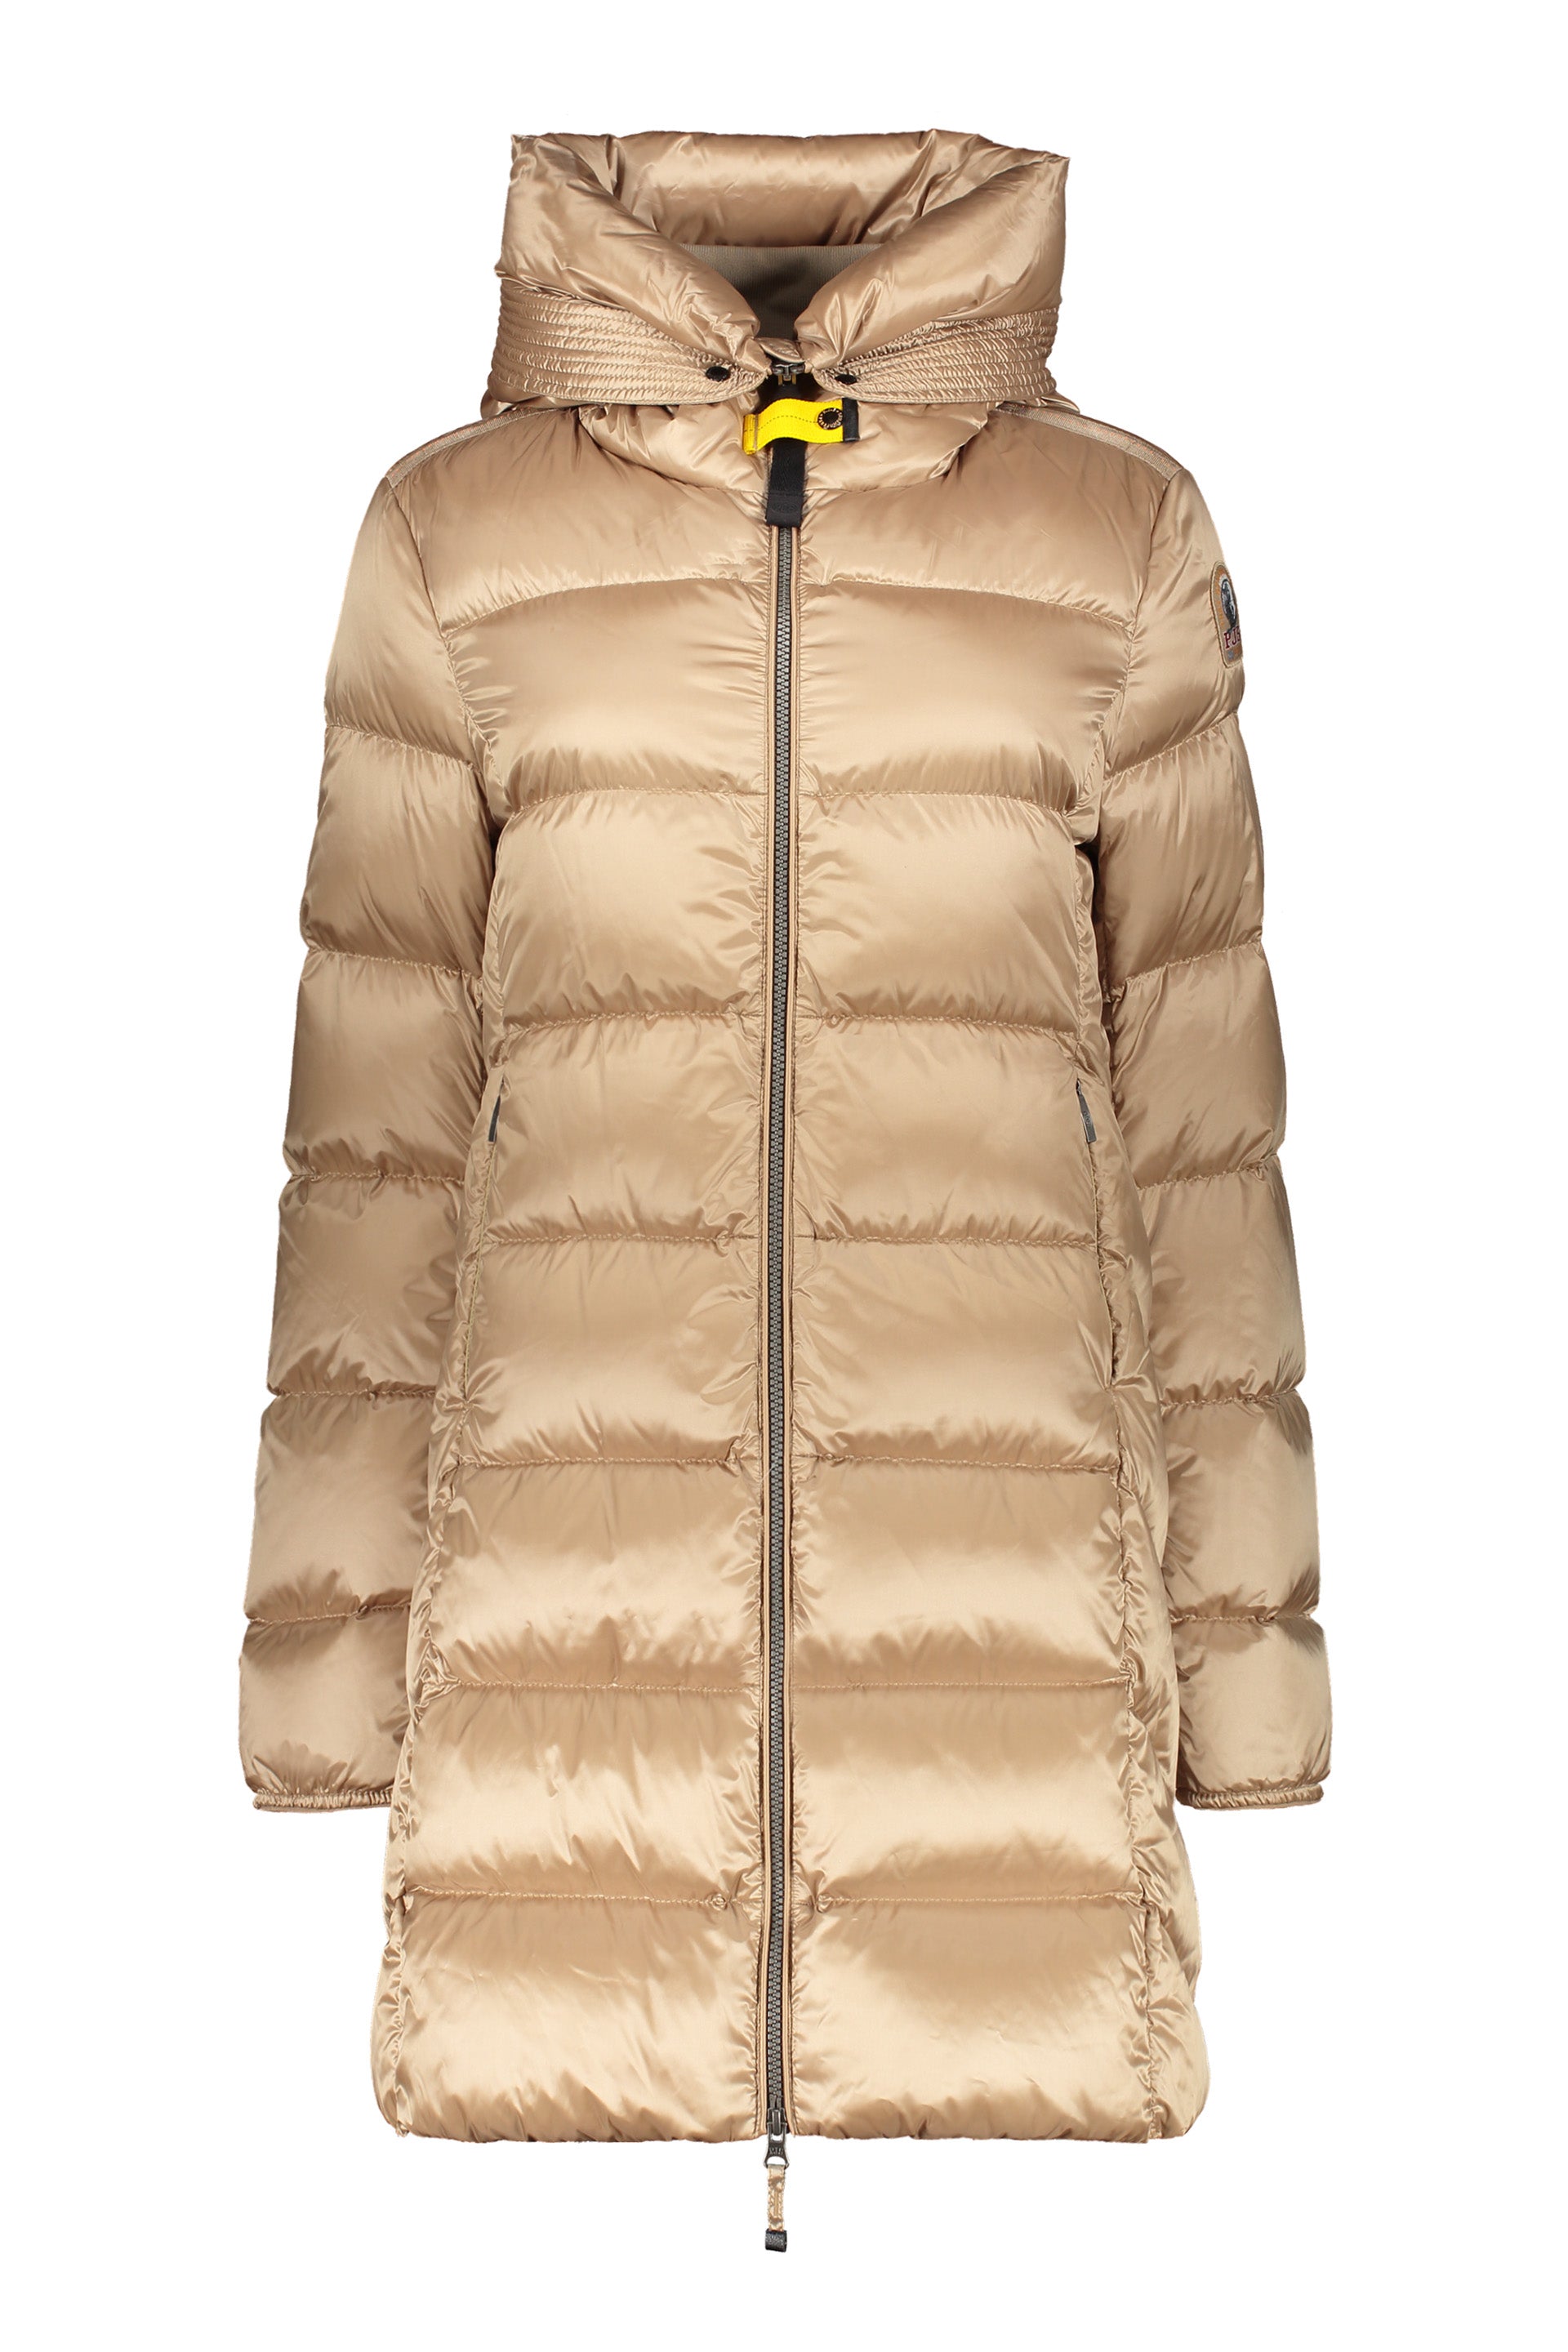 Parajumpers-OUTLET-SALE-Marion-hooded-down-jacket-Jacken-Mantel-L-ARCHIVE-COLLECTION.jpg